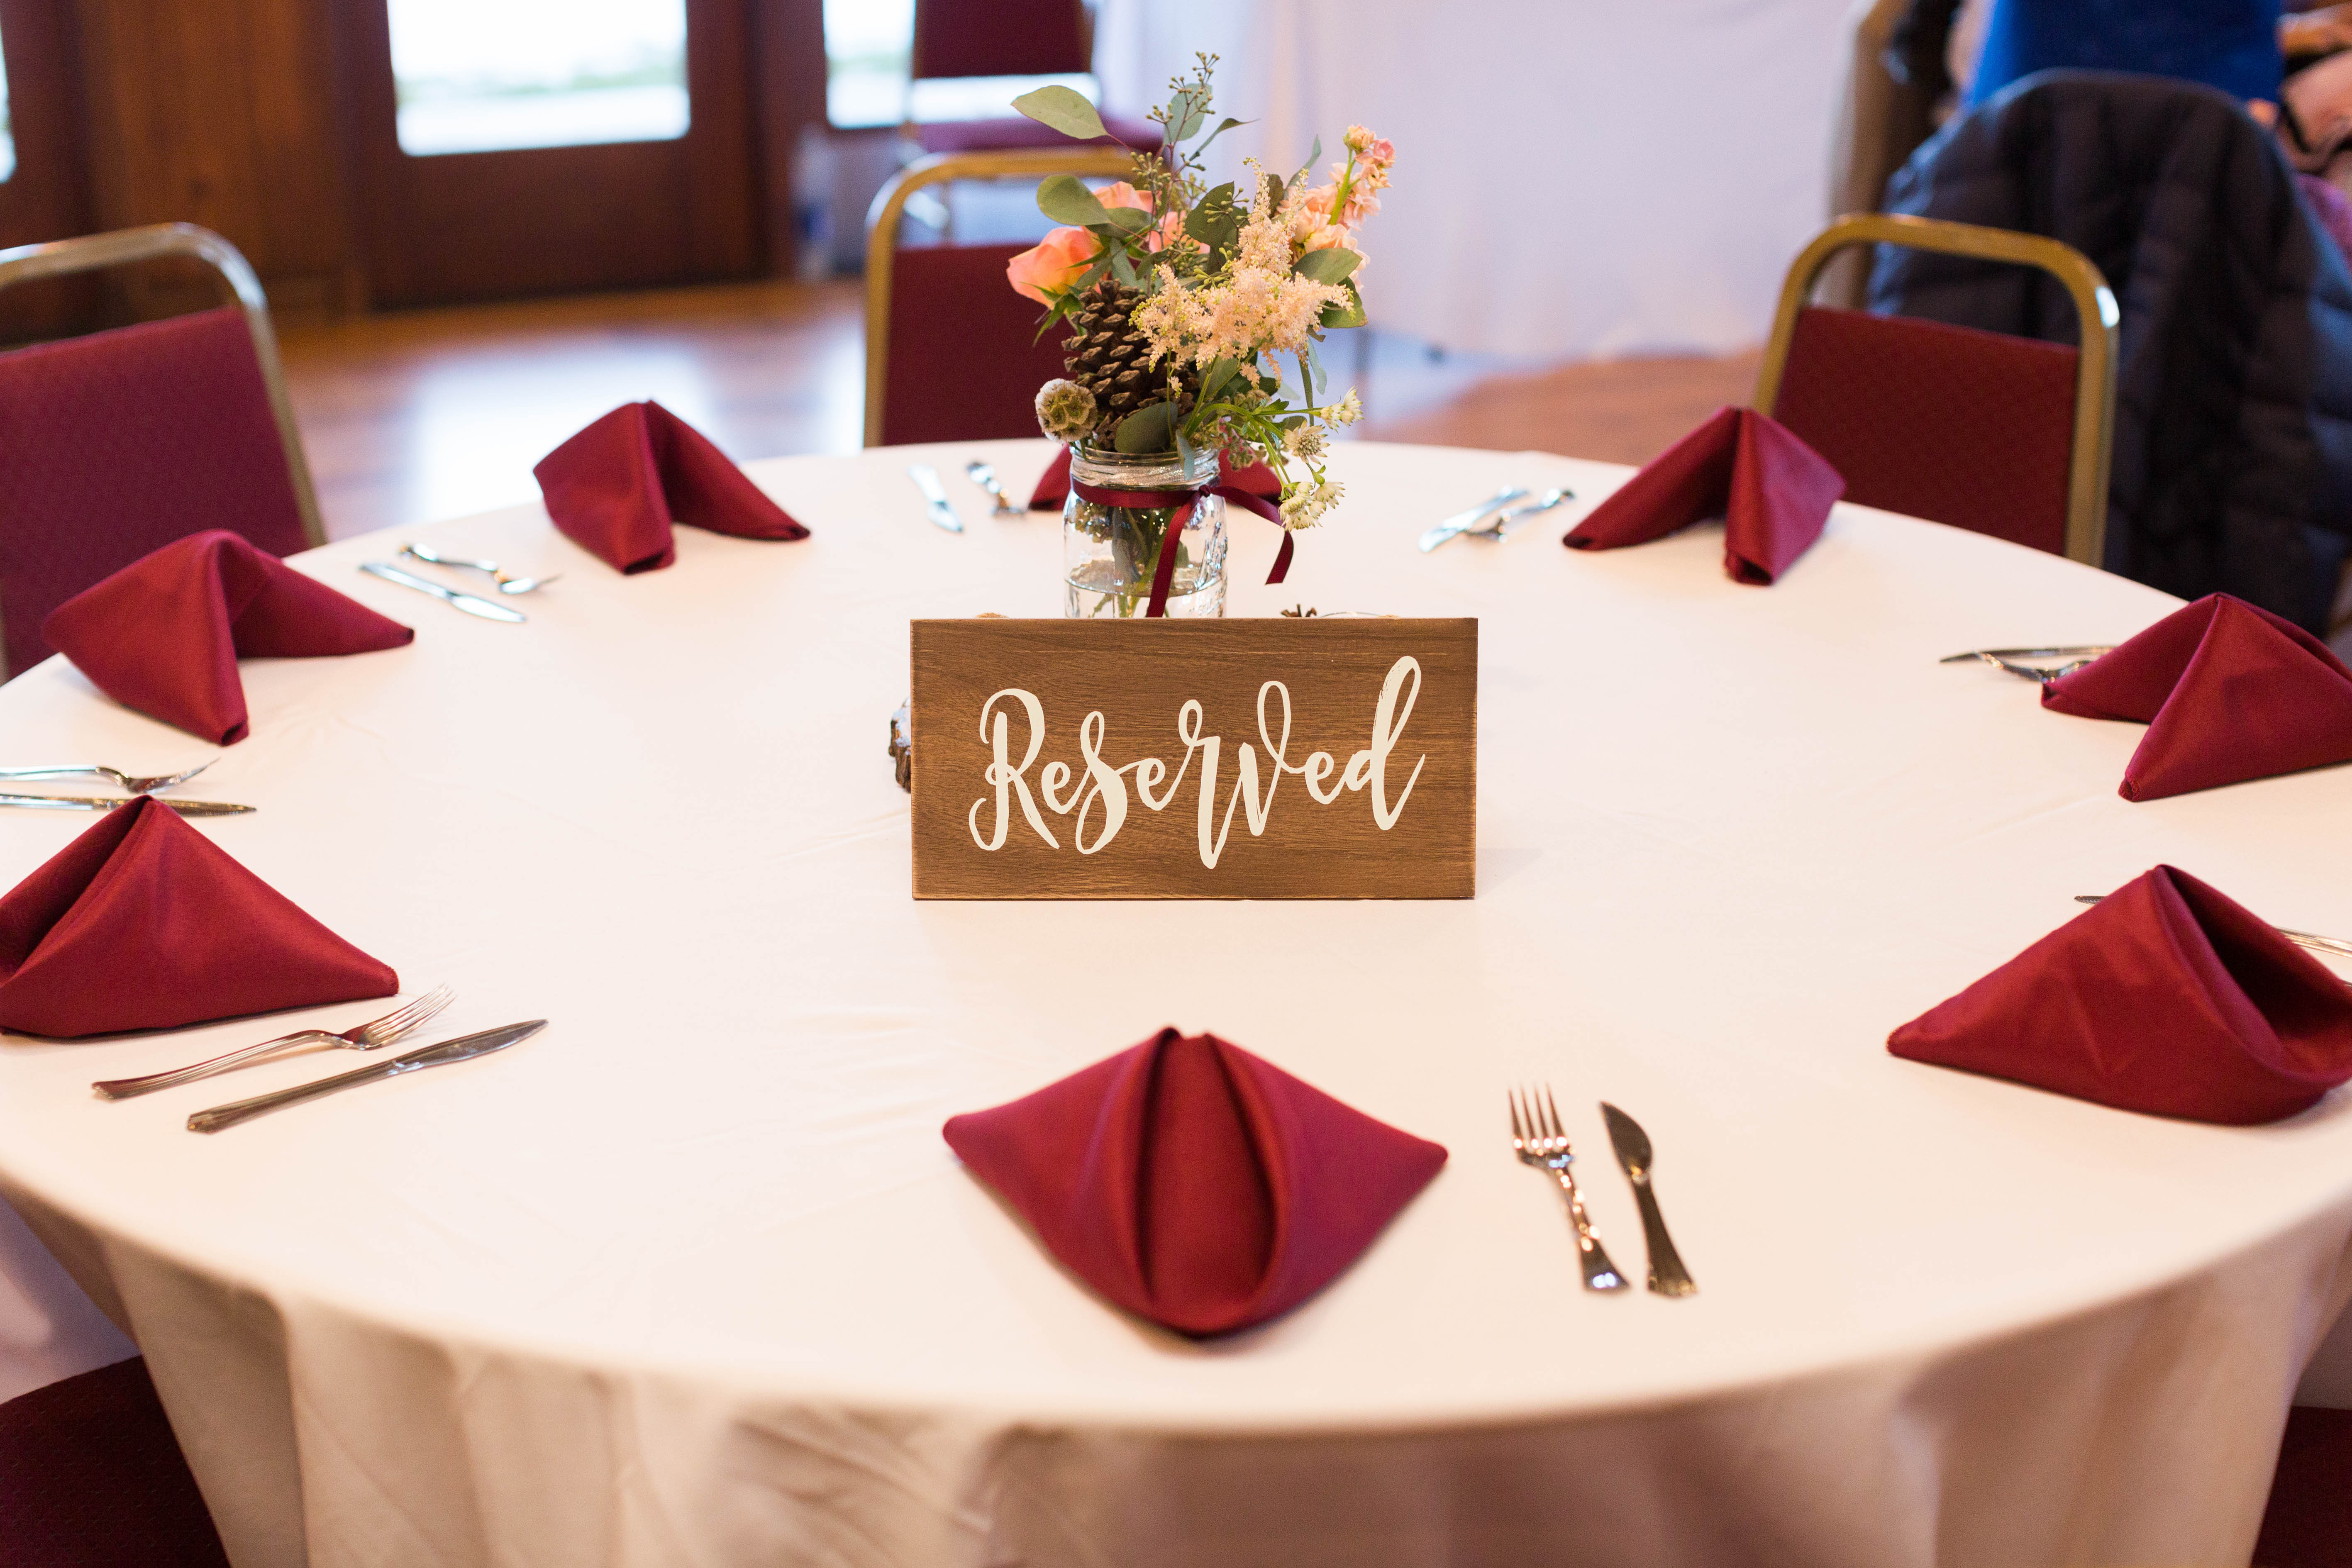 reception table decorated with white table cloth, burgundy napkins and a peach floral arrangement